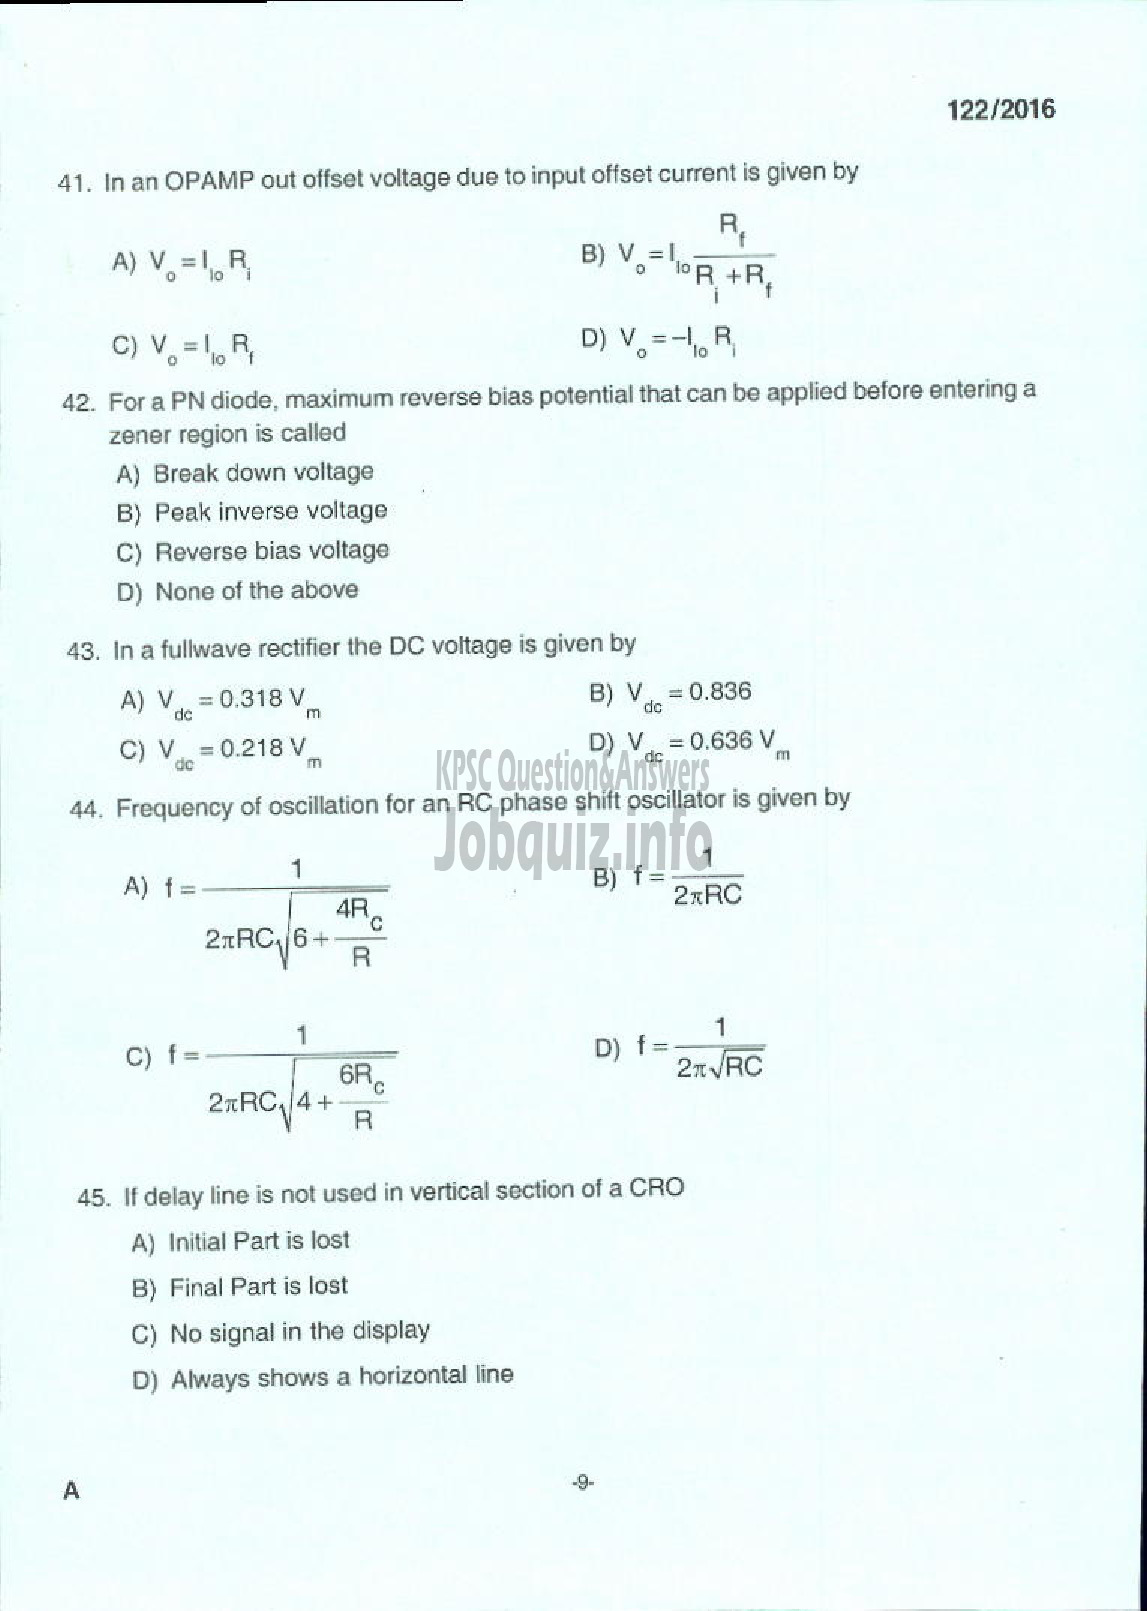 Kerala PSC Question Paper - ASSISTANT PROFESSOR MECHANICAL ENGINEERING TECHNICAL EDUCATION ENGINEERING DCOLLEGES-7